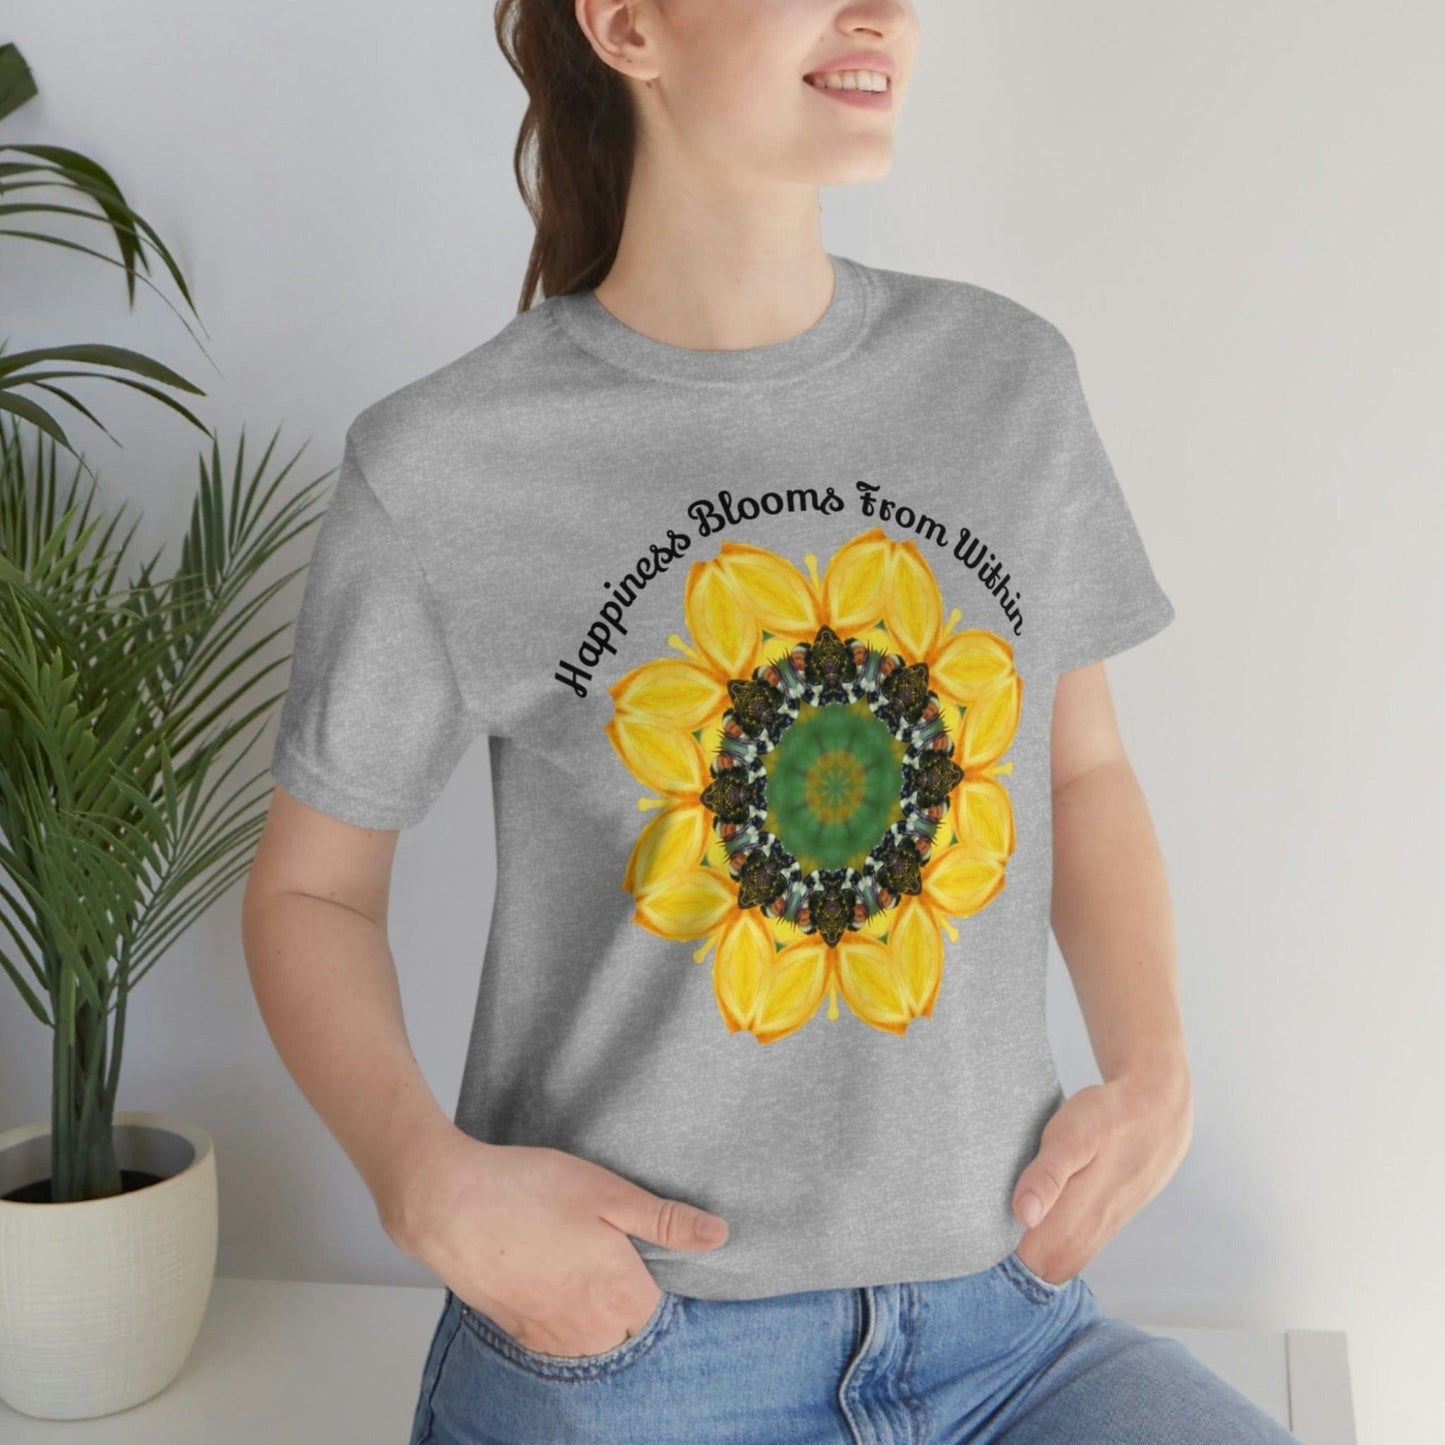 Bee T Shirt, Poet Shirt, Zen Mystical Insect Shirt, Witty Bug Shirt, Cute Shirts -Happiness Blooms From Within